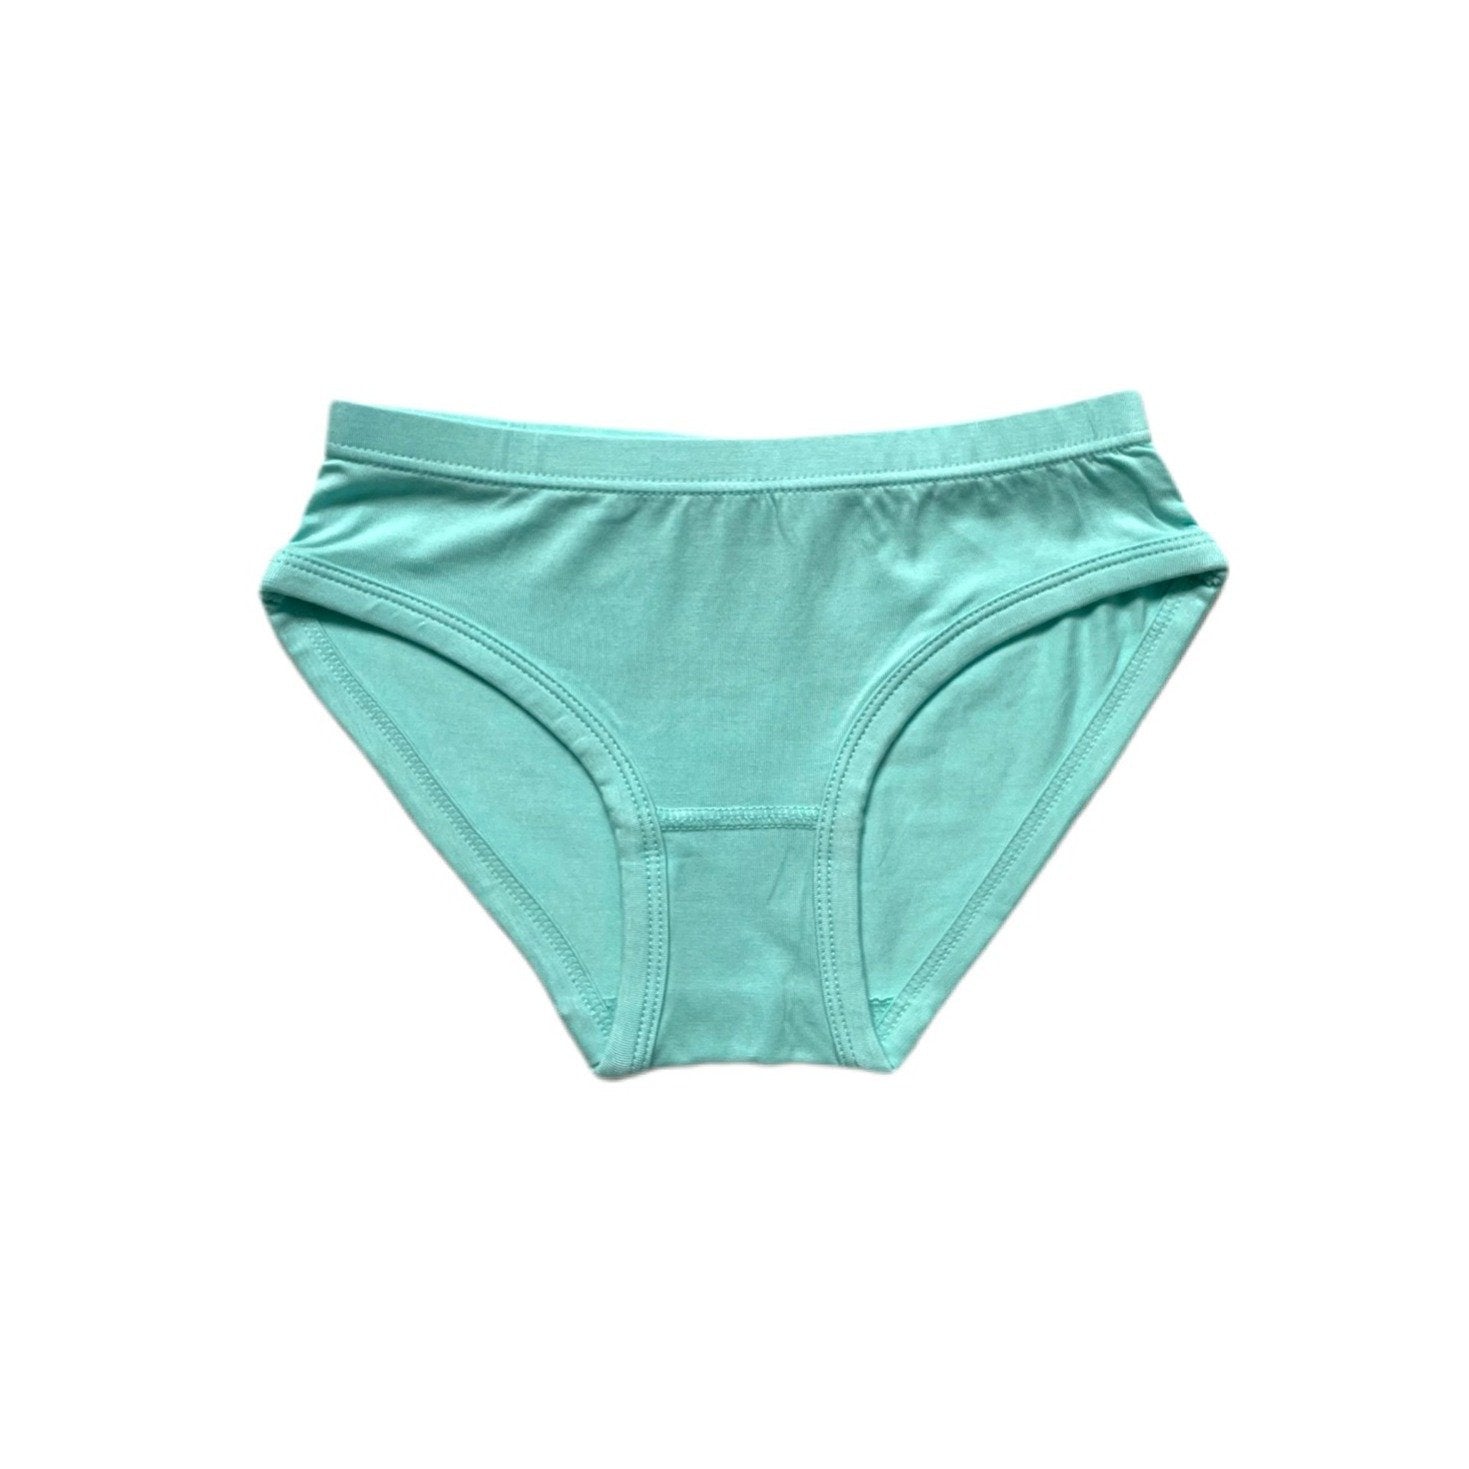 Bamboo Baby comfy undies - girls - emilie the butterfly